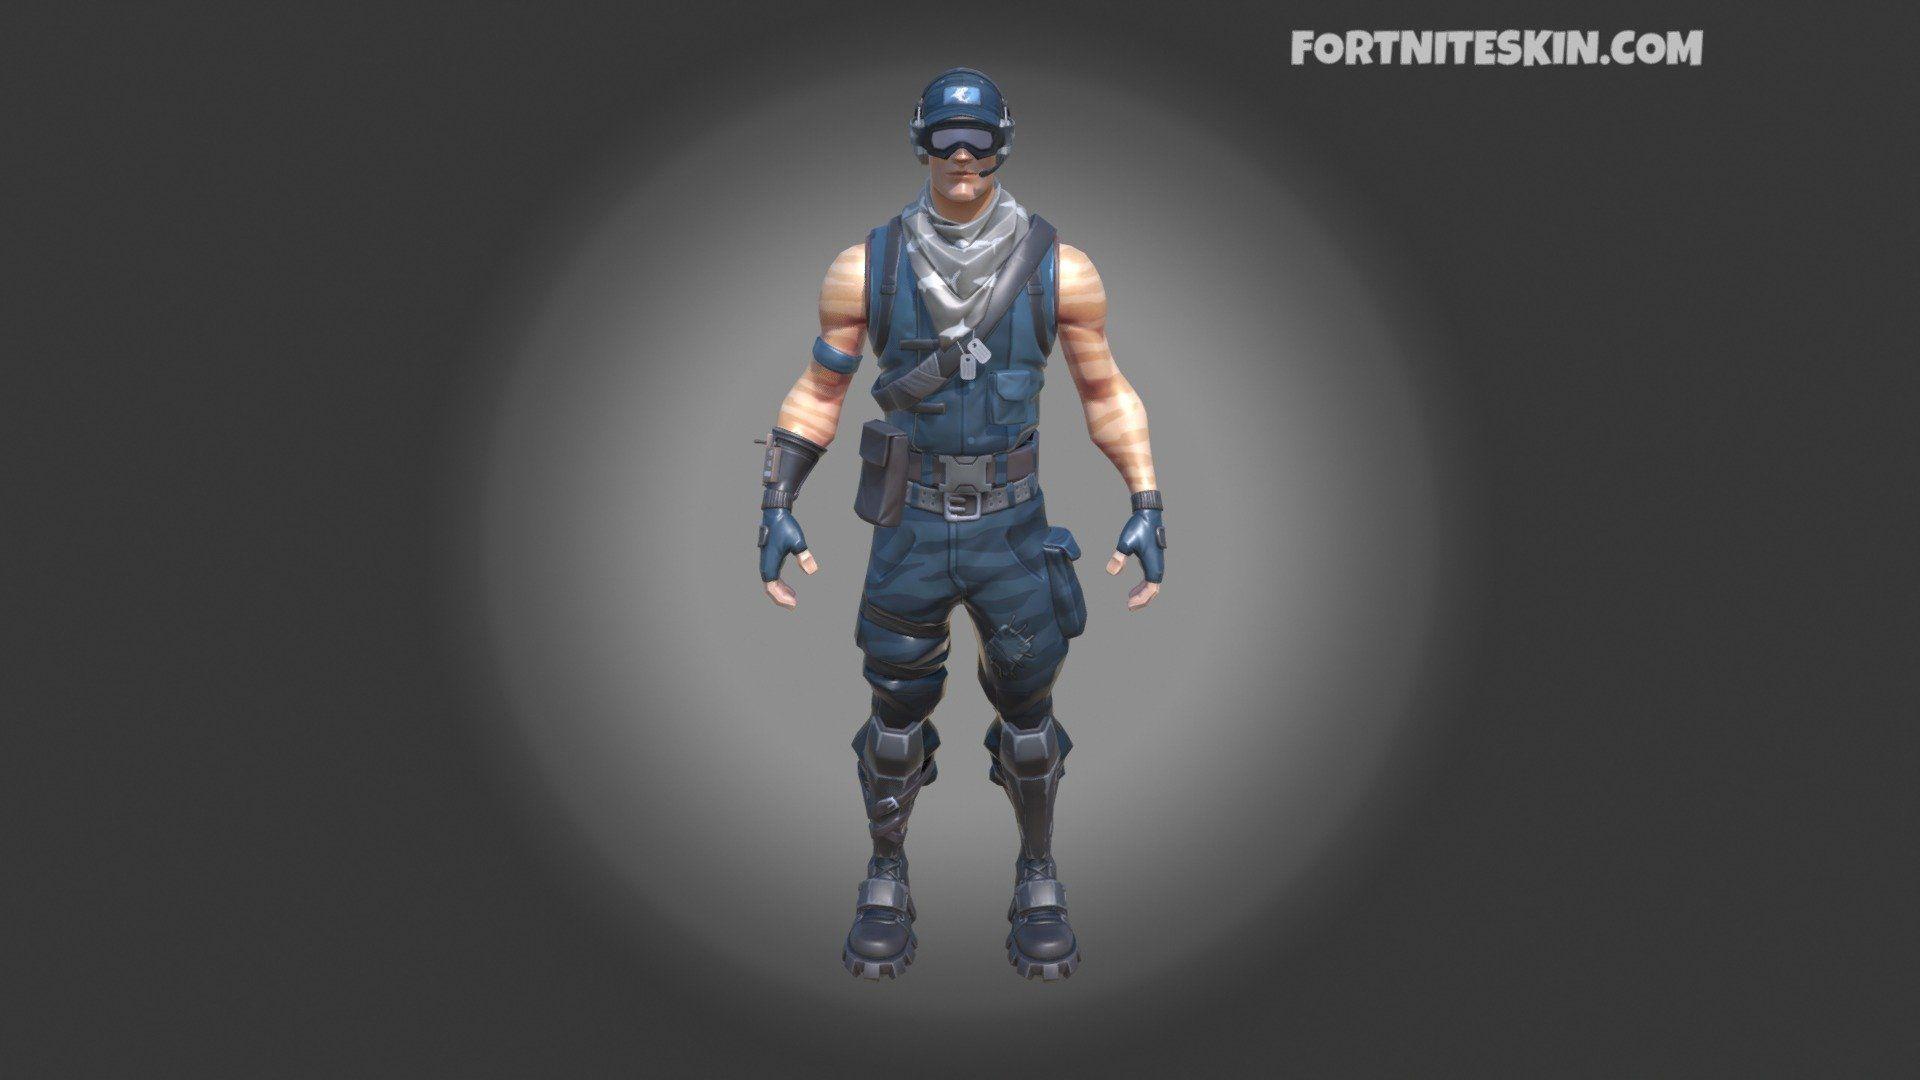 FORTNITE Outfit First Strike Specialist model